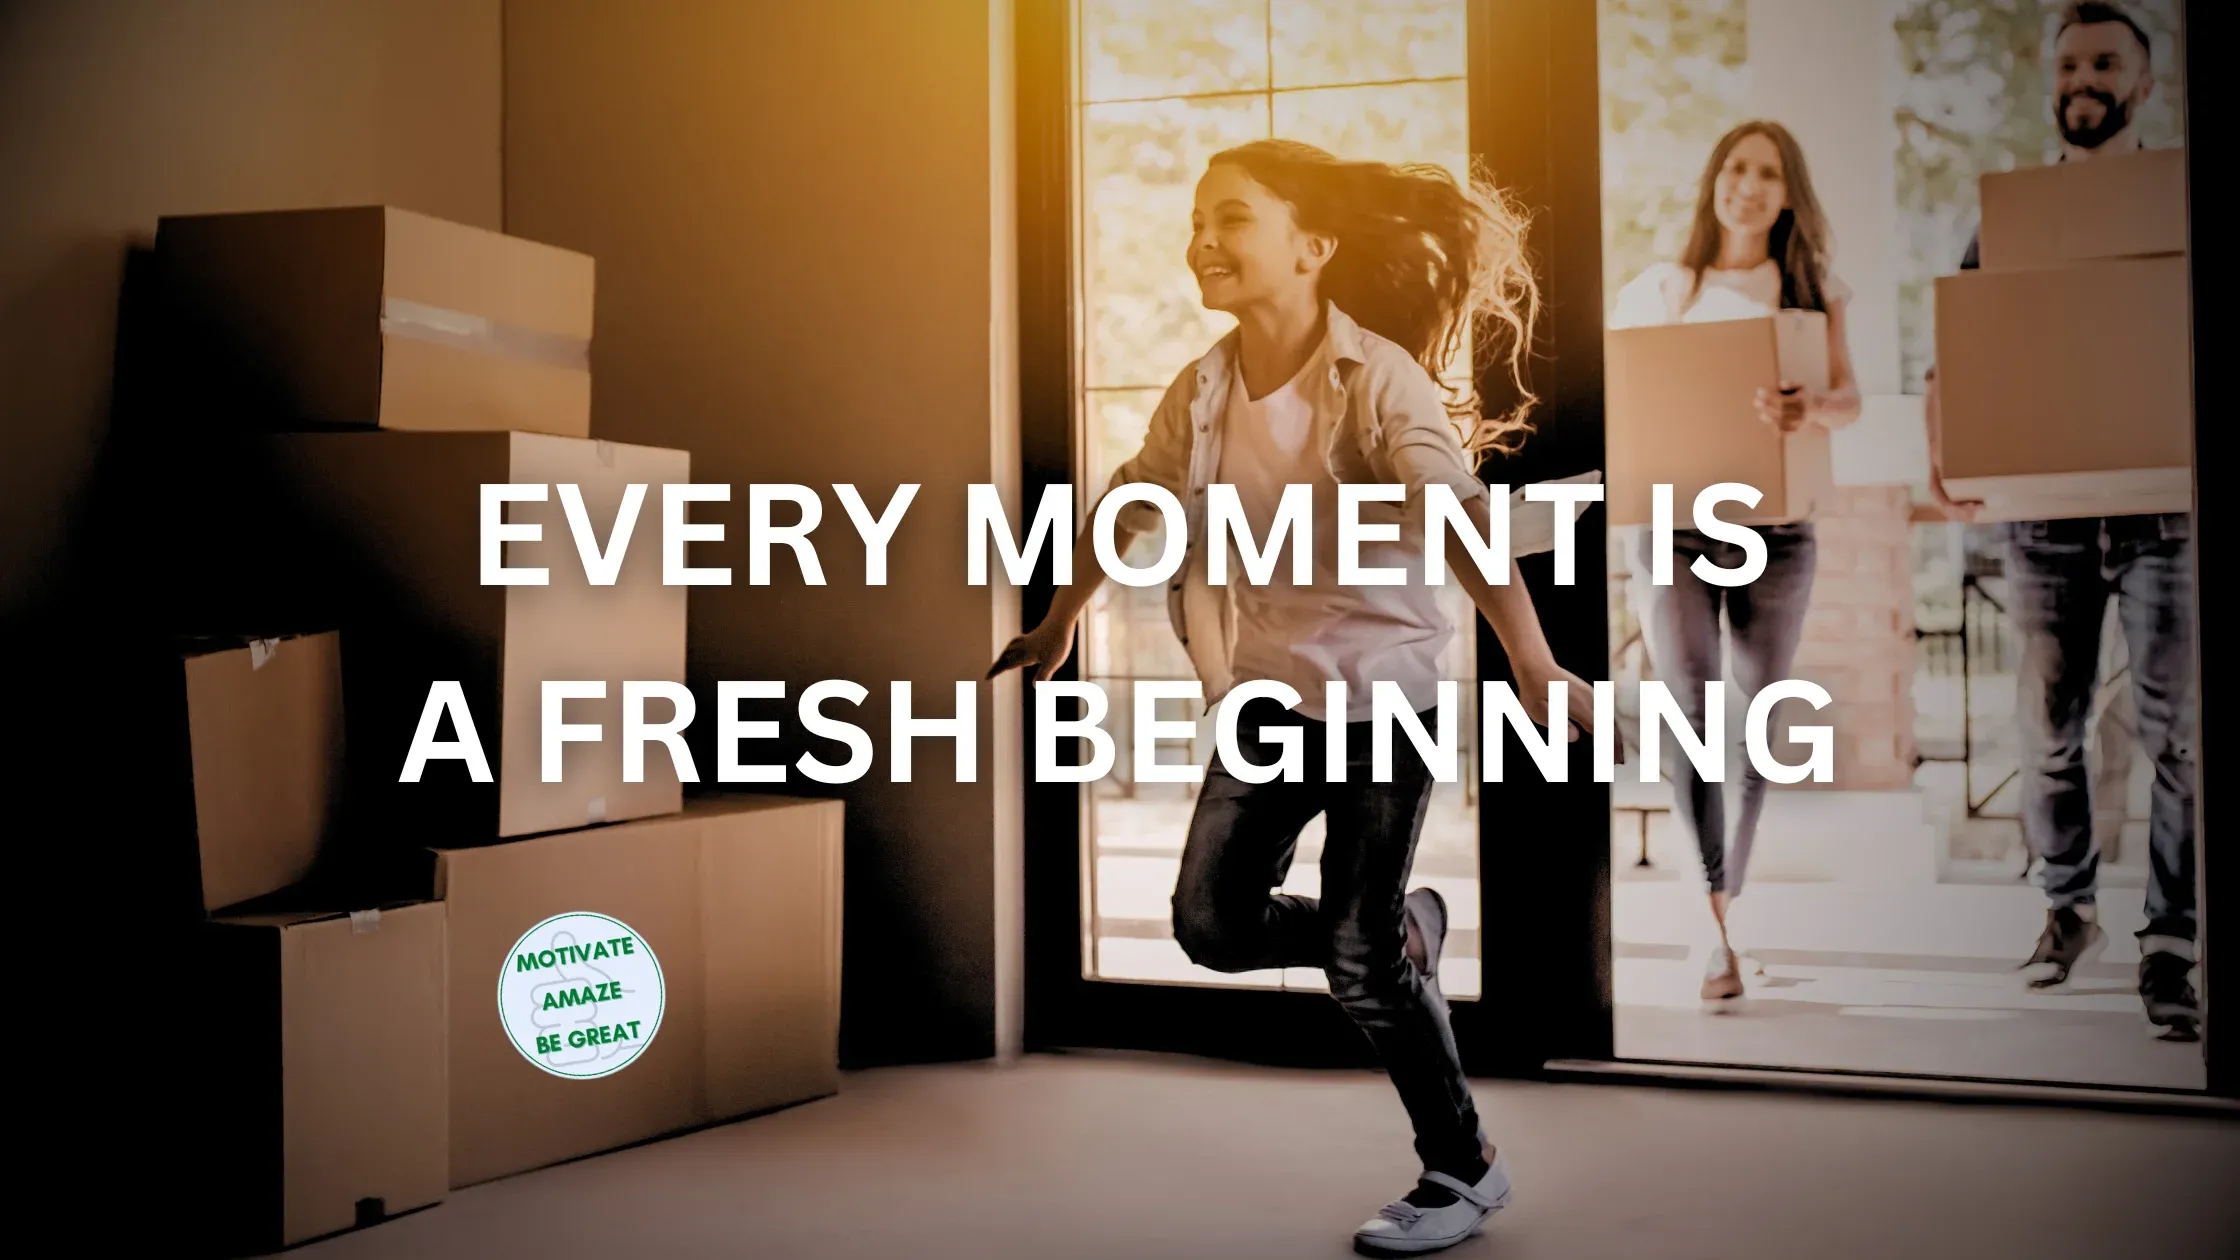 Header image of the article: "Why Every Moment is a Fresh Beginning".